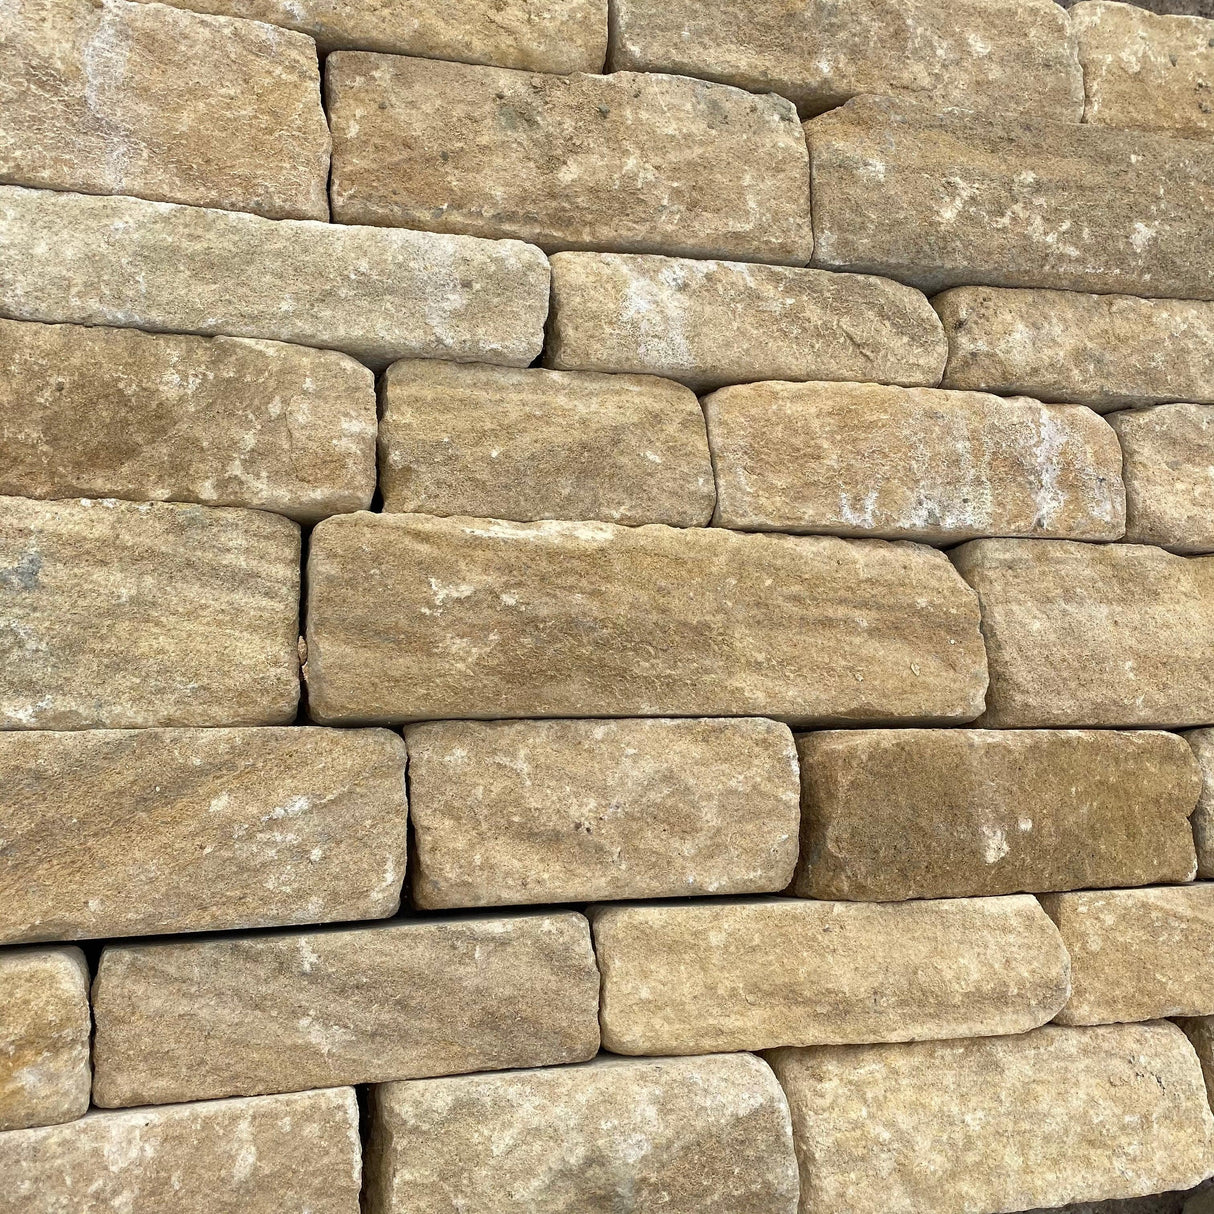 Reclaimed Natural Stone Buff Yorkshire Building Stone - 4” Bed - Bulk Bags - Reclaimed Brick Company